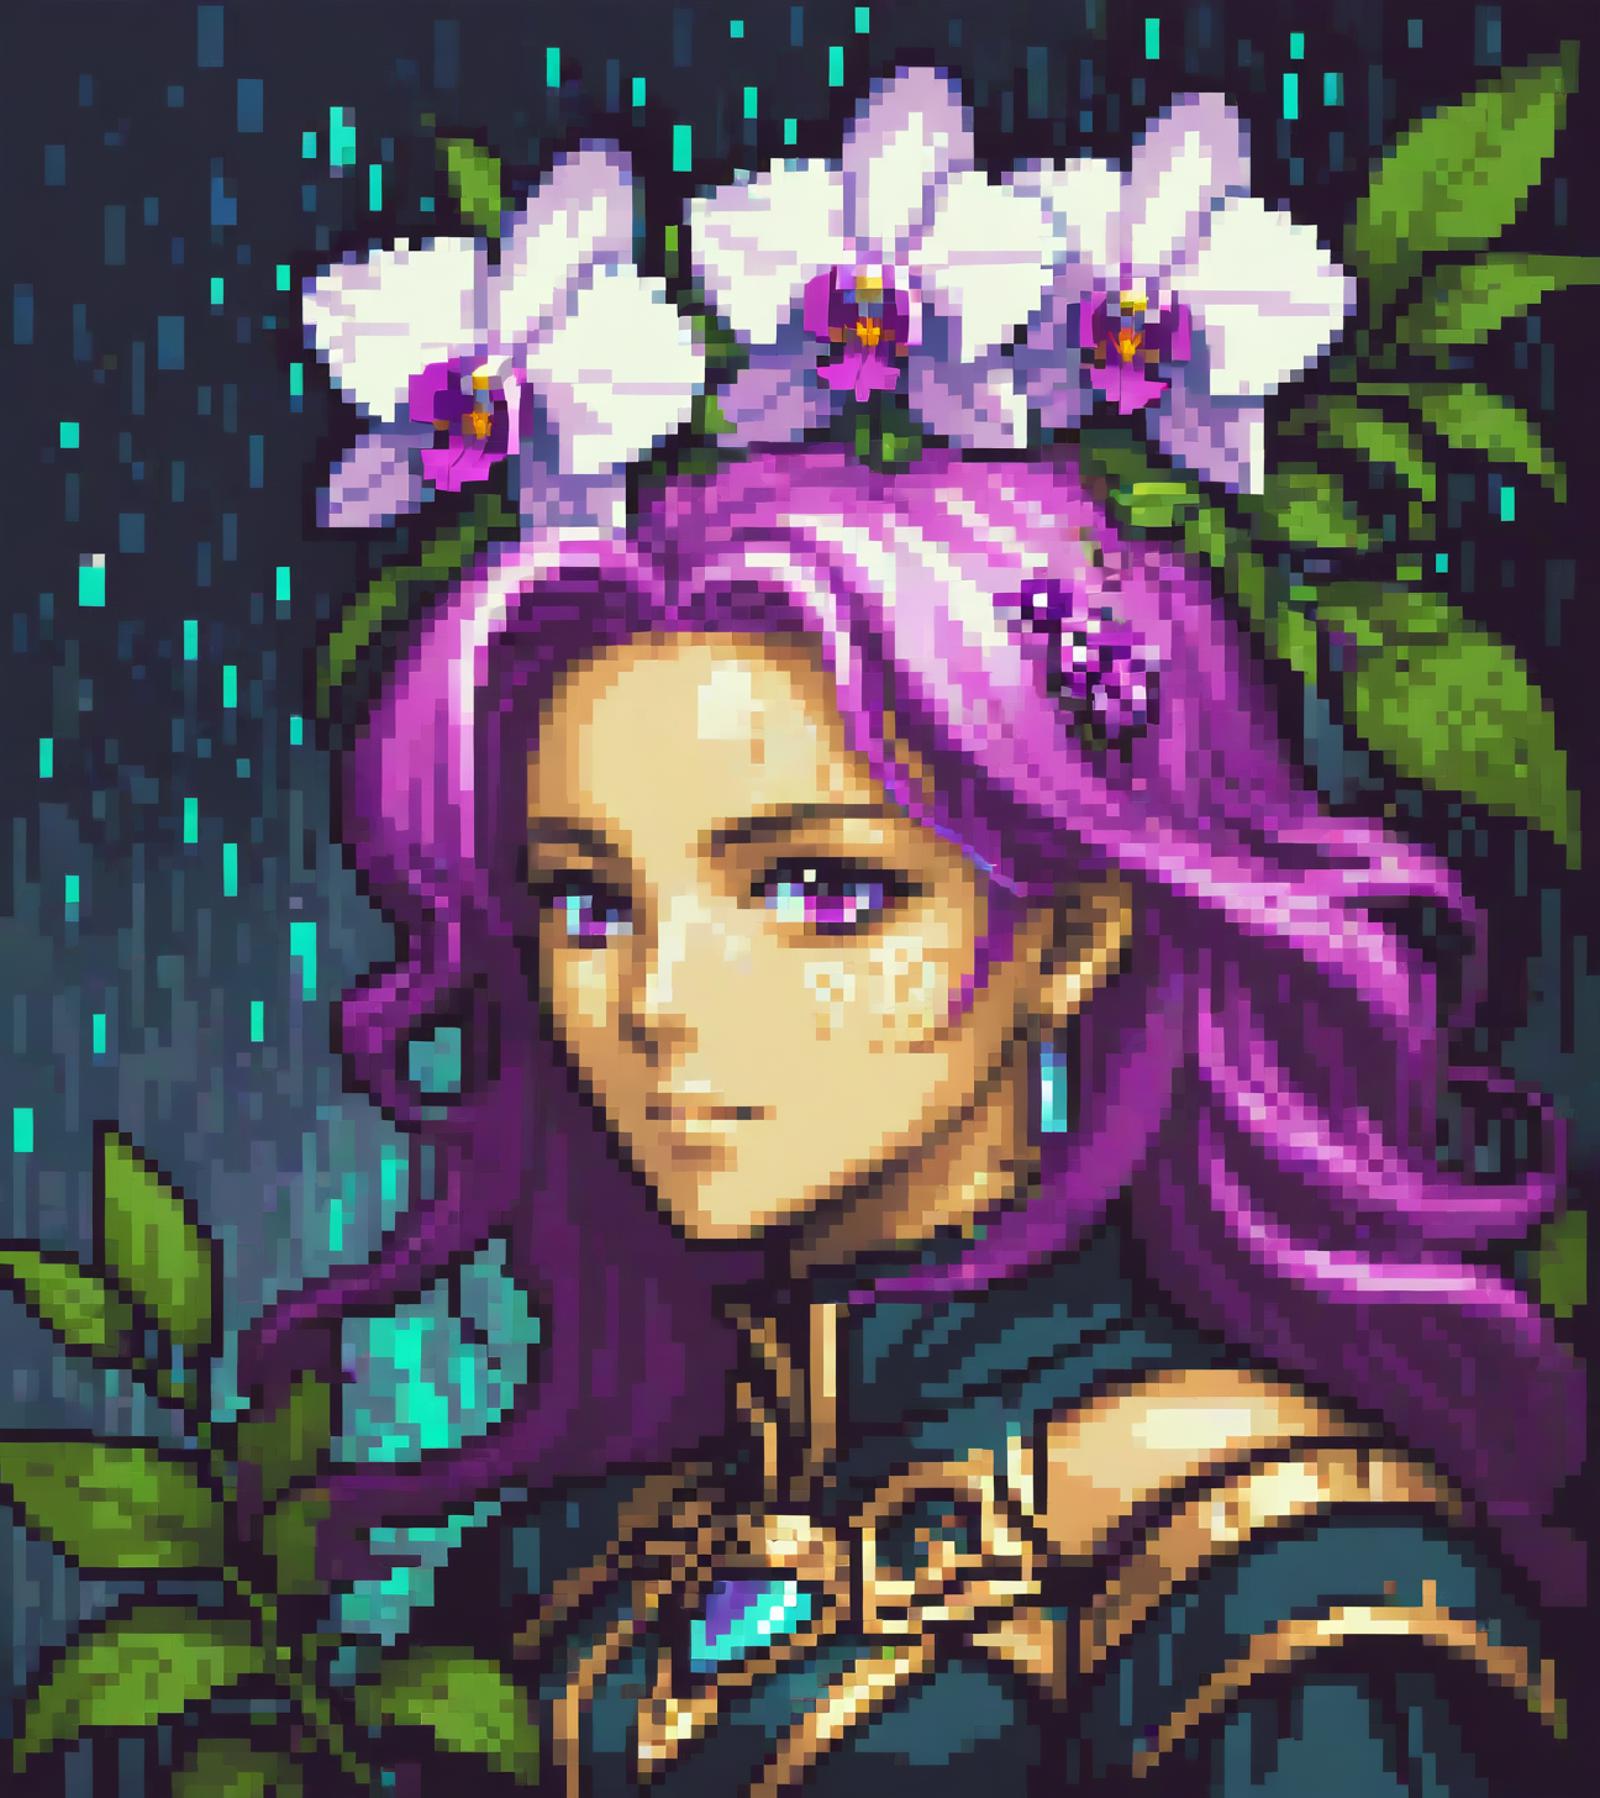 Pixel Style (& GBA Fire Emblem Portraits) image by deep_synth